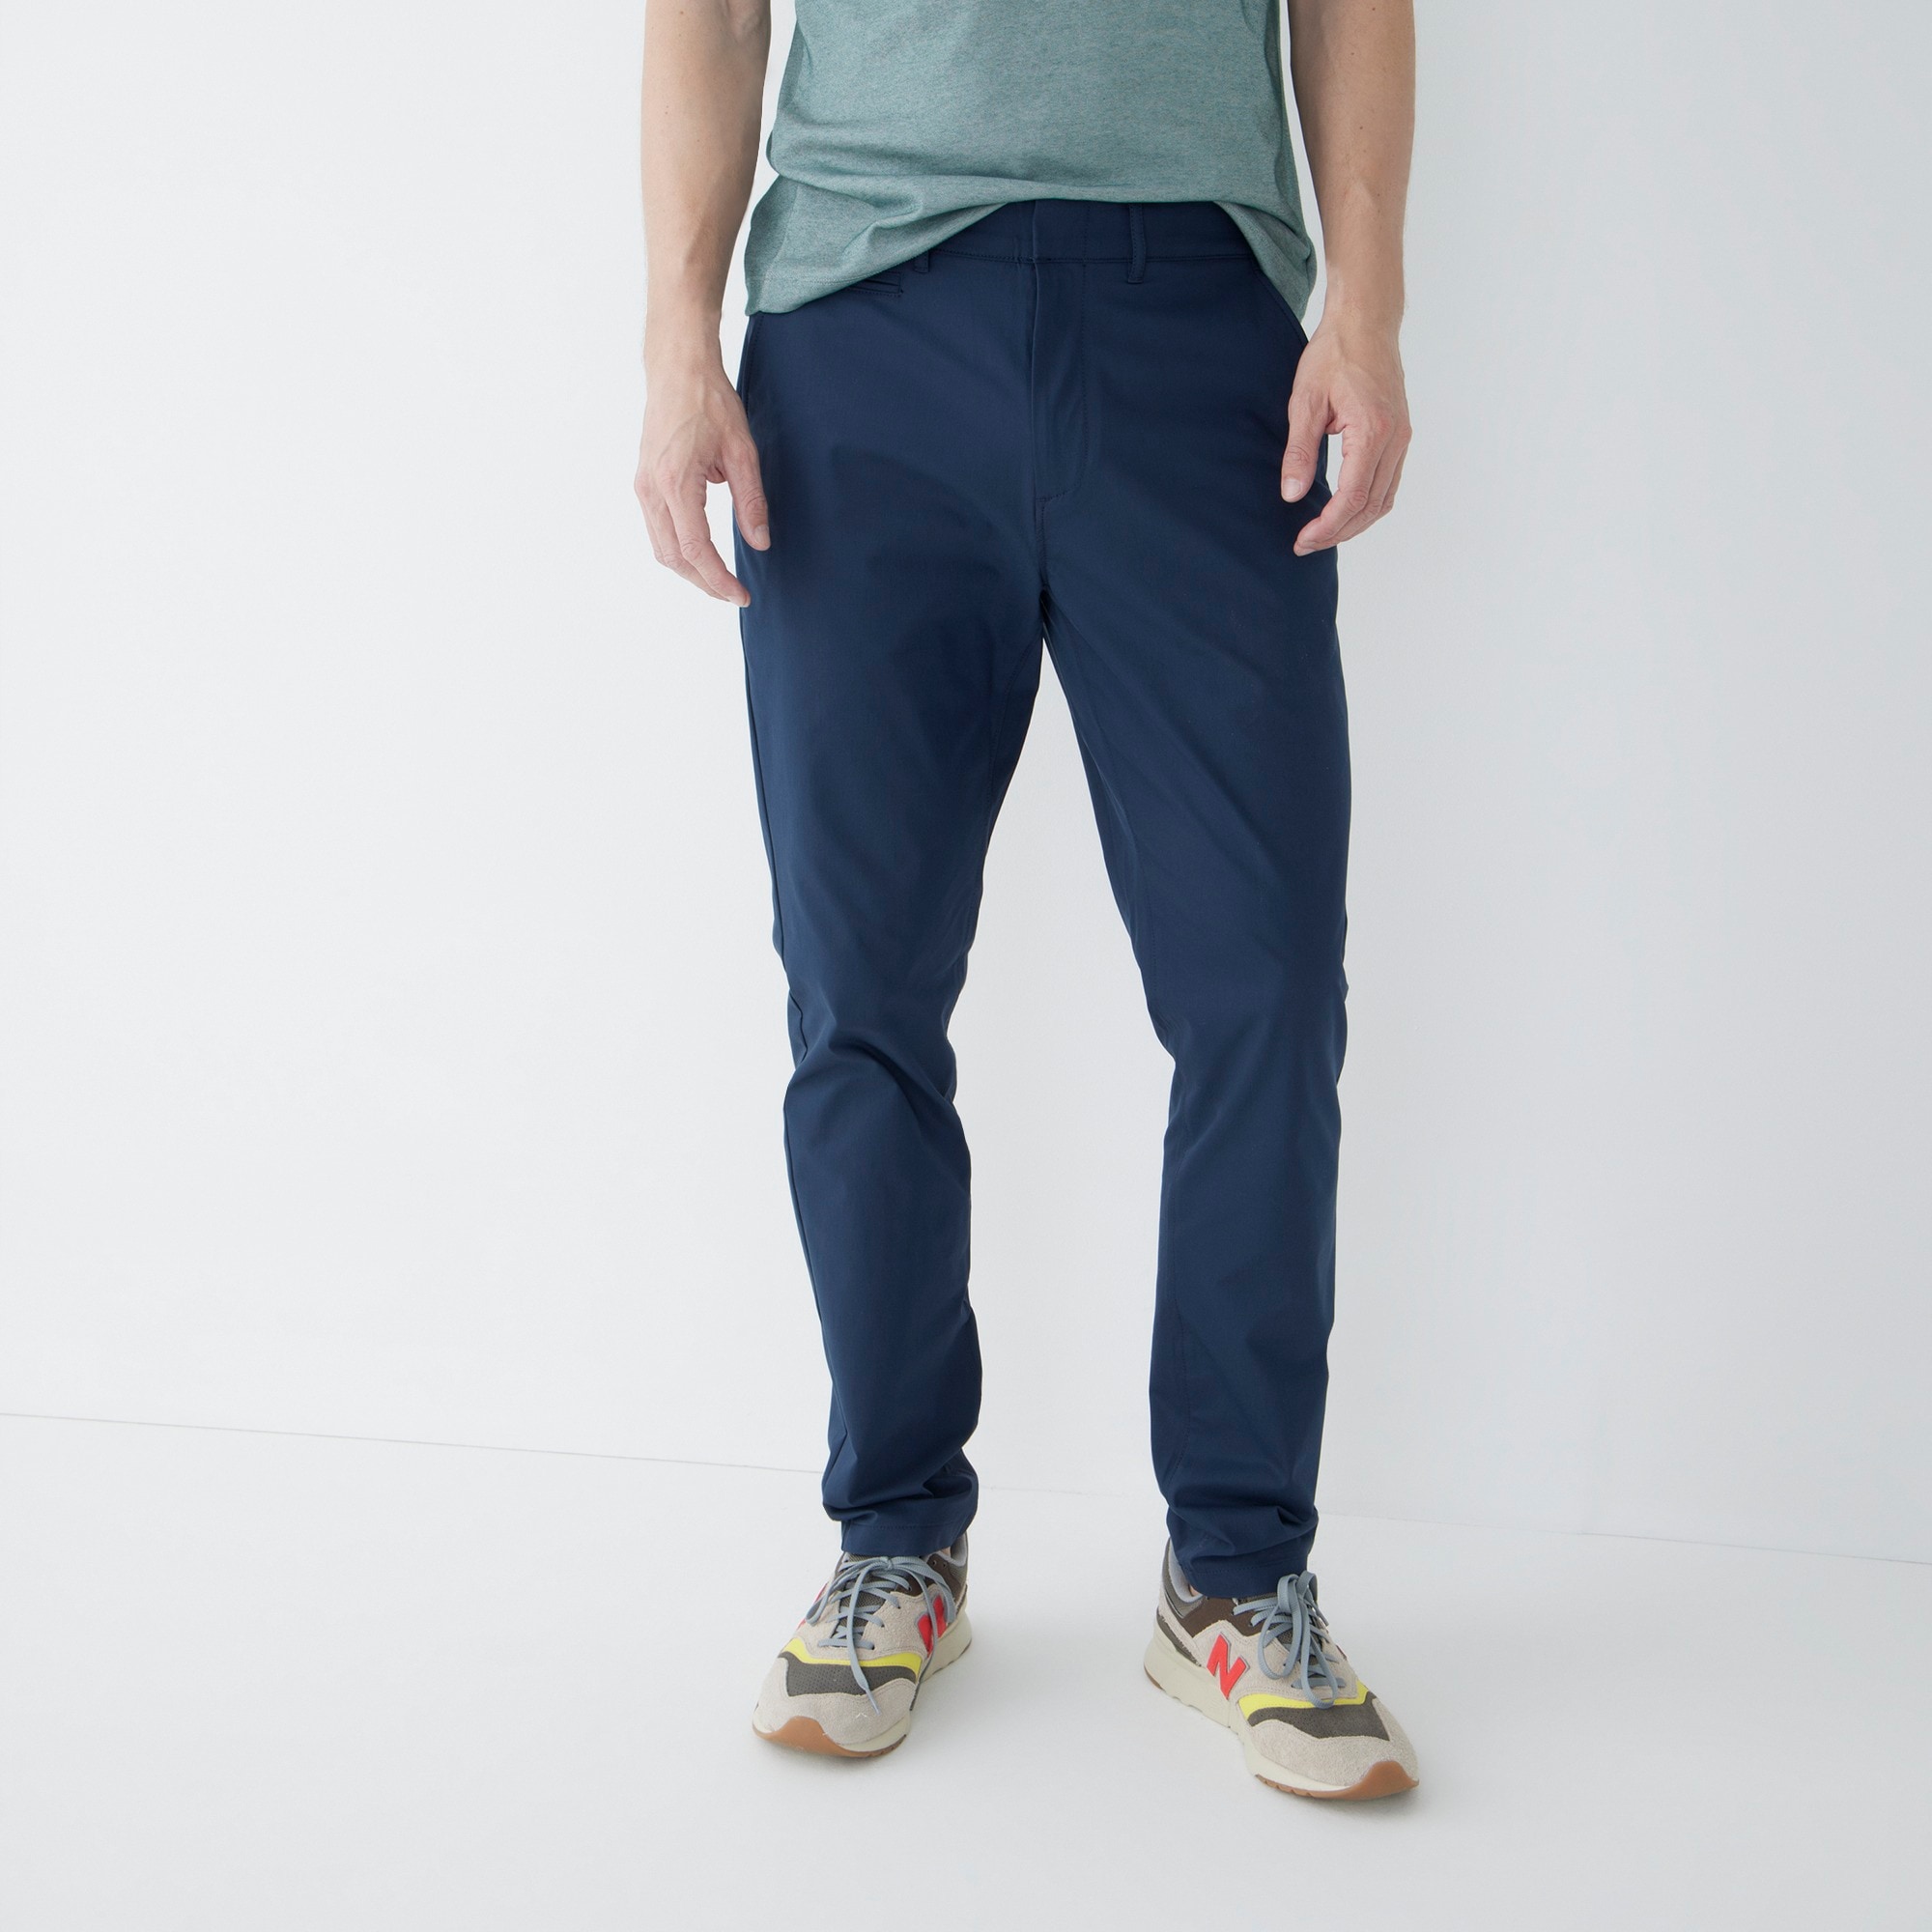 Jcrew 1040 Athletic tapered-fit tech pant